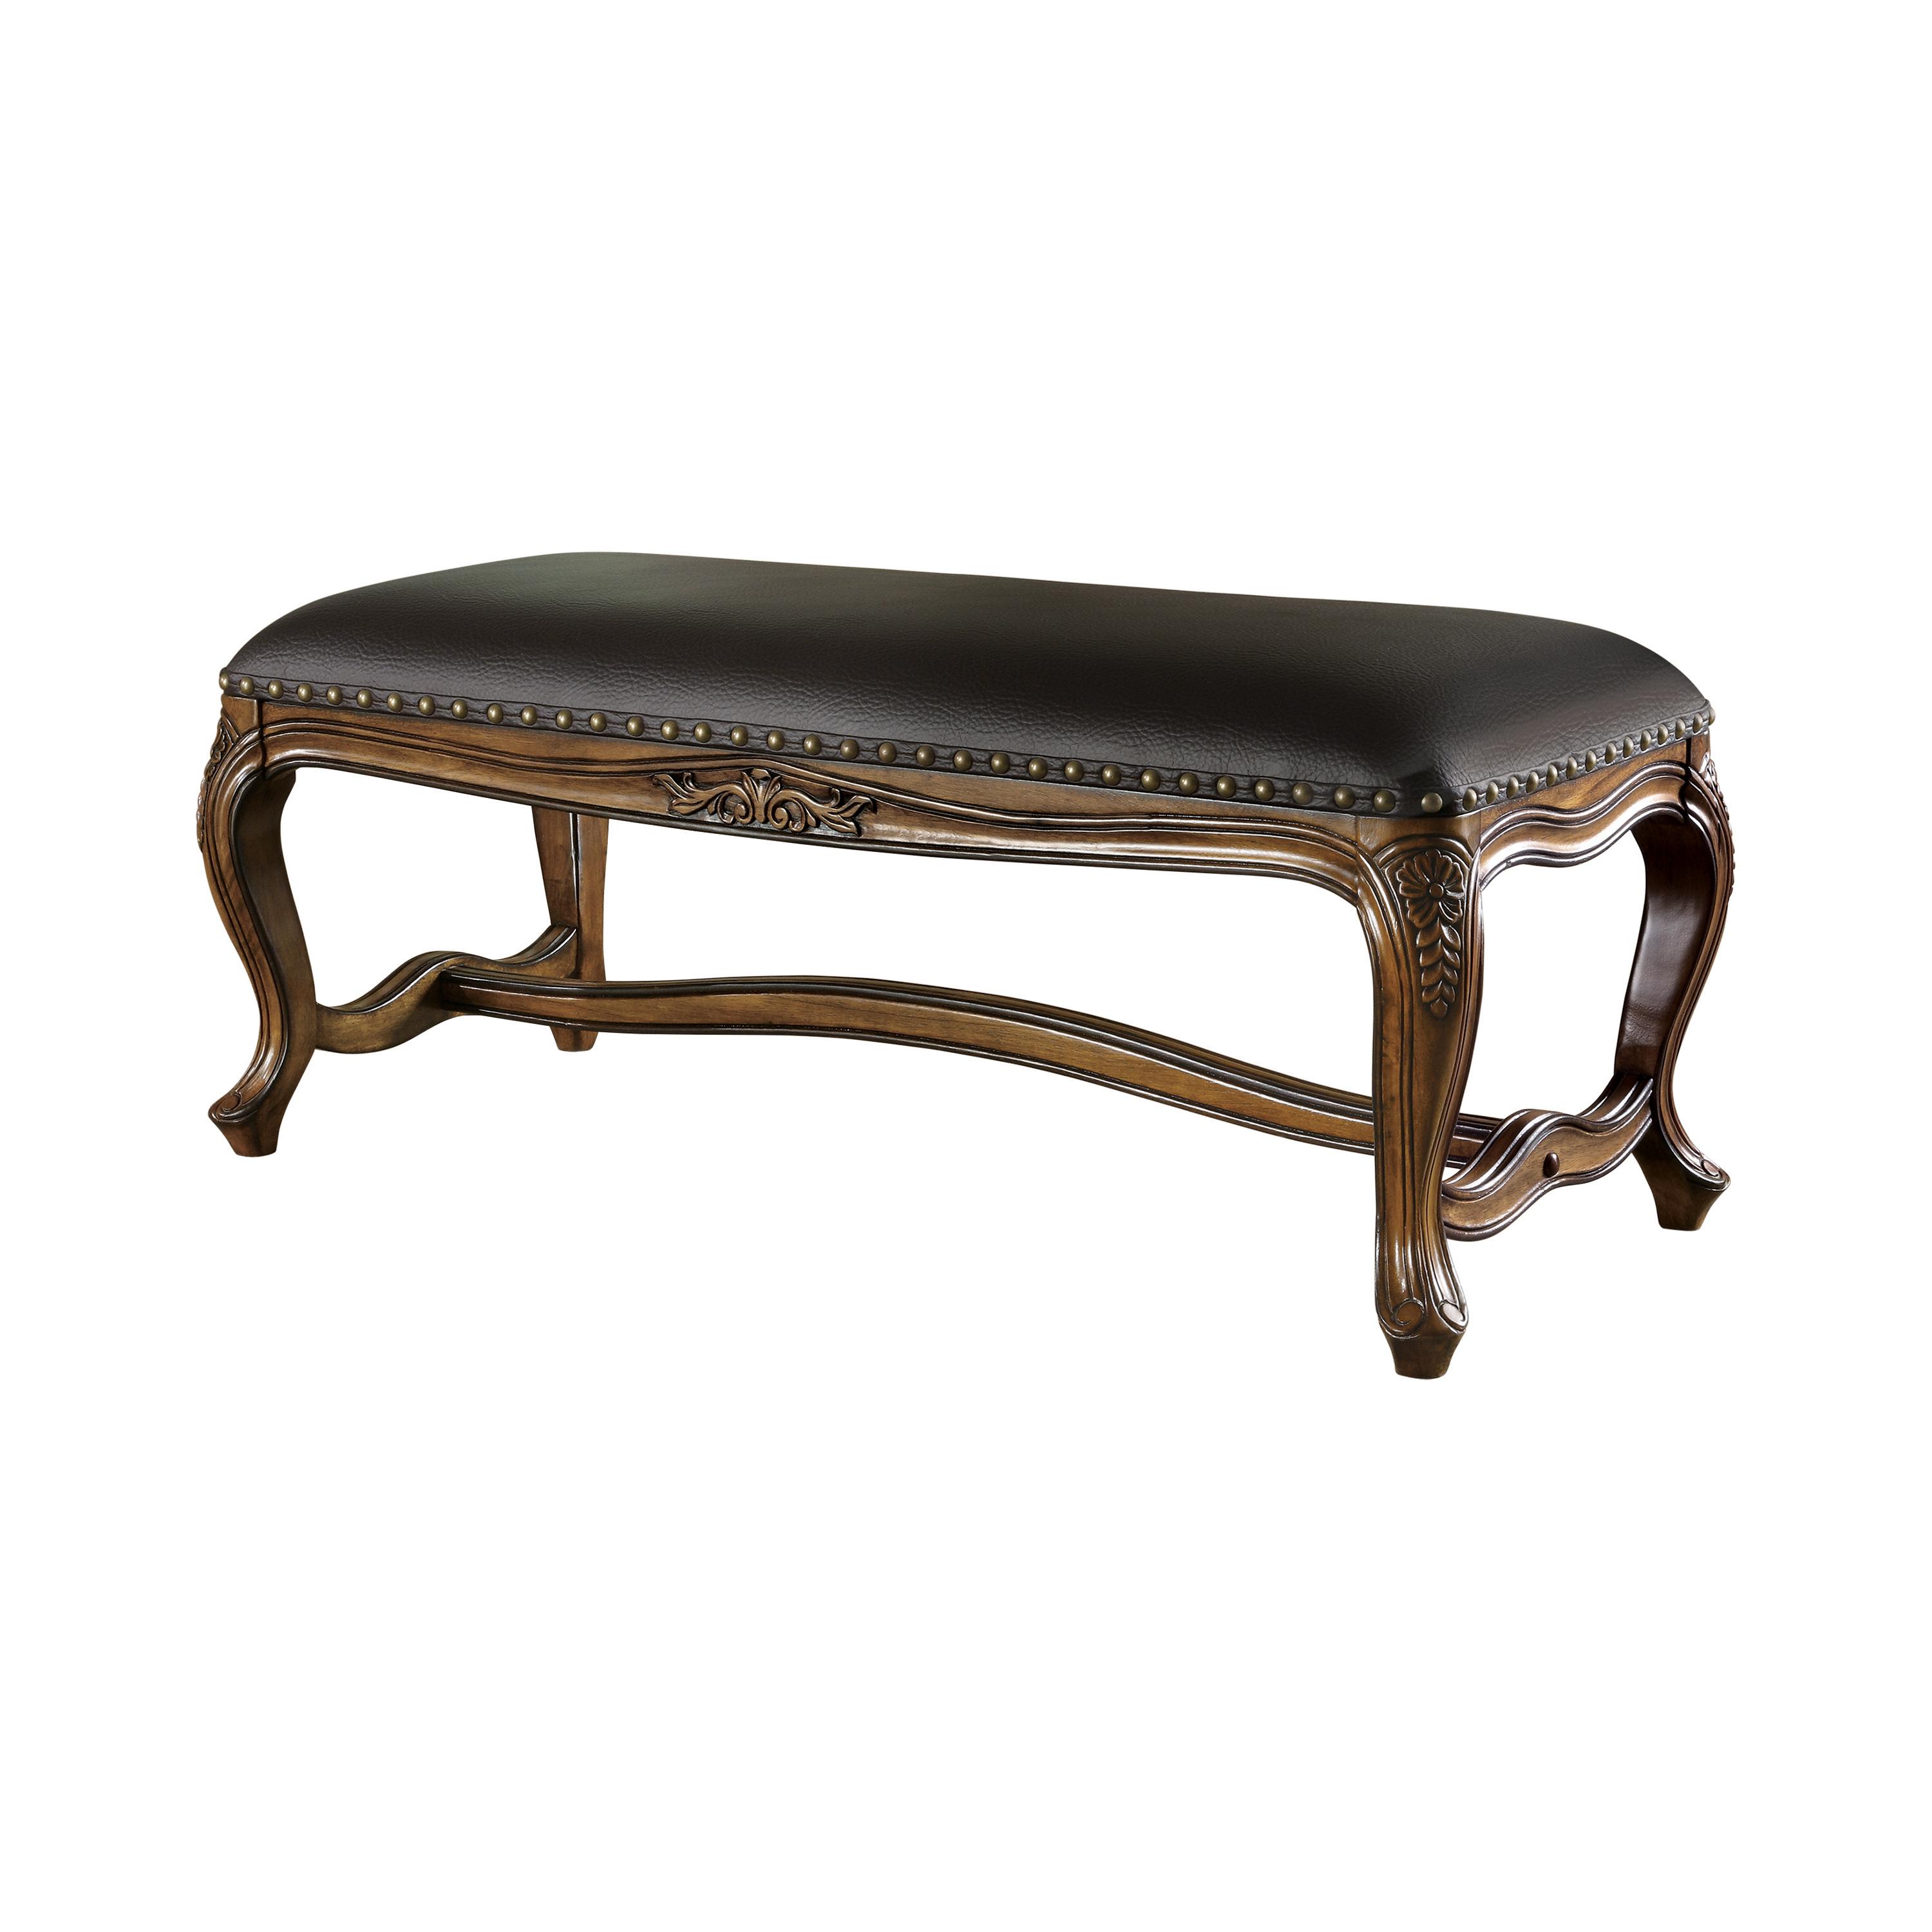 Traditional Bench 501006 501006 in Black Leatherette